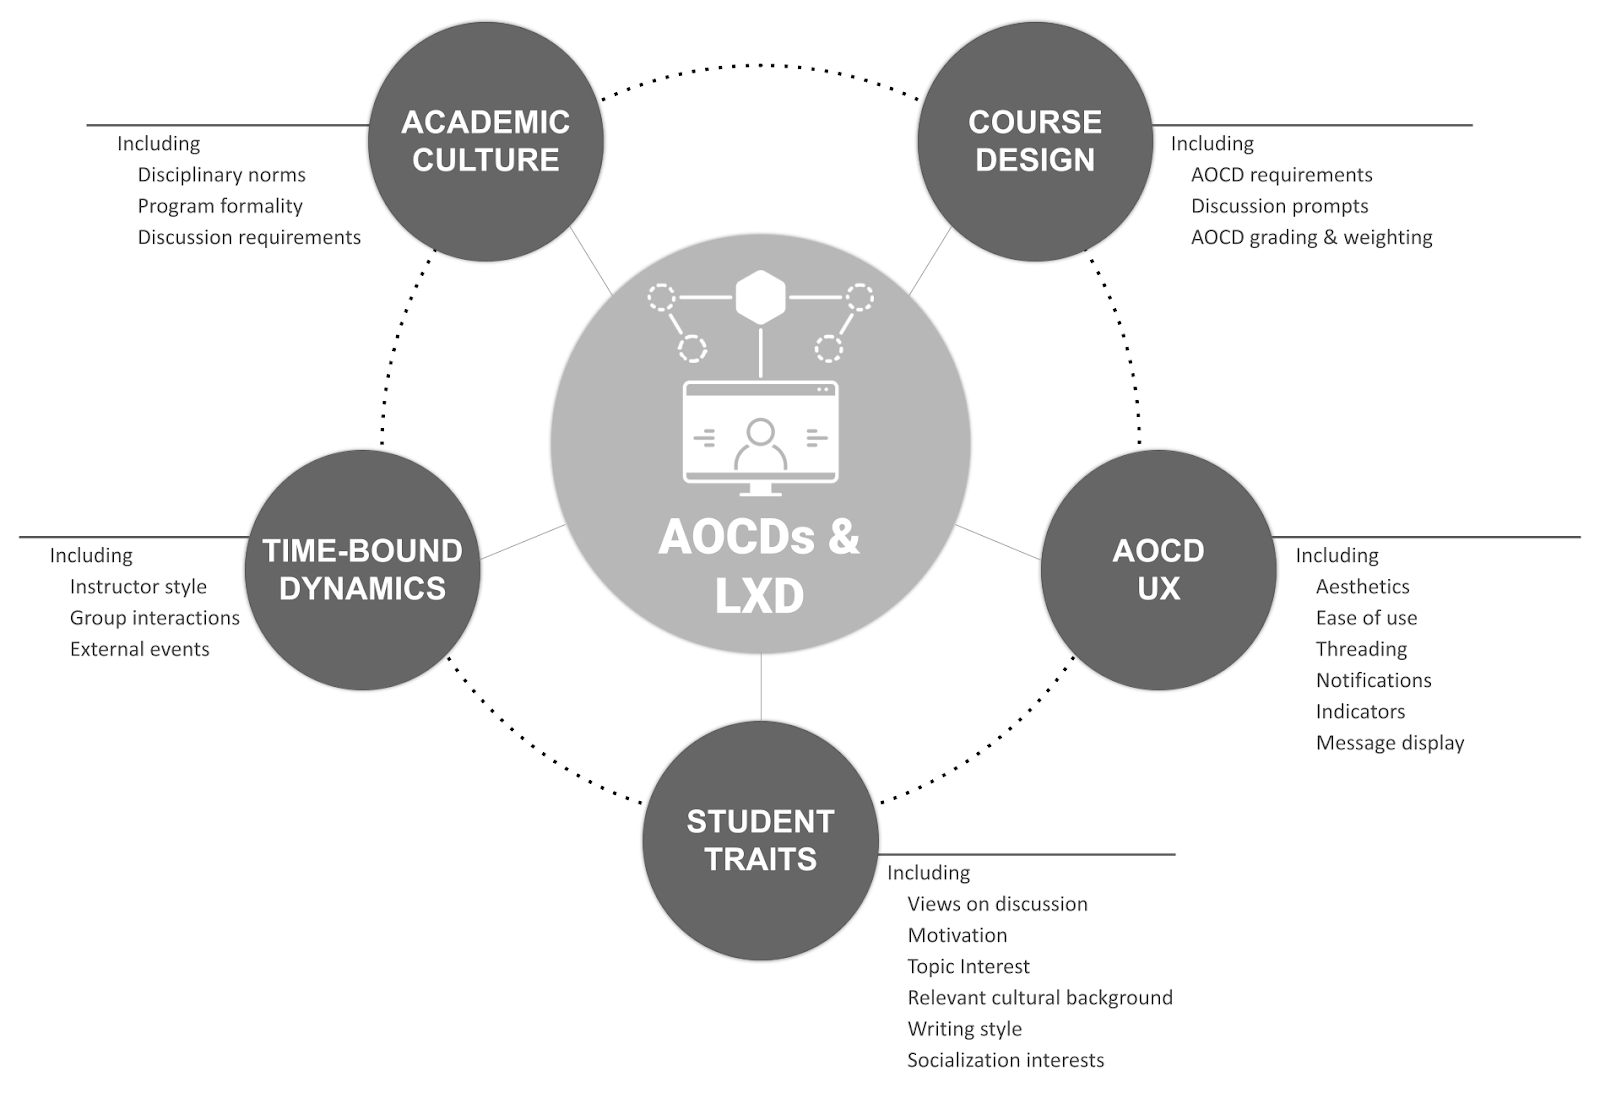 A visualization of a conceptual model for learning experience design and AOCDs. It has a large circle at the center which contains an icon featuring a computer with a person on it. The circle is labeled "AOCDs and LXD." Going around the circl clockwise are five smaller circles. The first circle is labeled "Course Design" and has the words "Including AOCD requirements, discussion prompts, and AOCD grading and weighting." The next circle is labeled "AOCD UX" and has the words "including aesthetics, ease of use, threading, notifications, indicators, and message display." The third circle is labeled "Student Traits" and has the words "including views on discussion, motivation, topic interest, relevant cultural background, writing style, and socialization interests." The fourth circle is labeled "Time-bound Dynamics" and has the words "including instructor style, group interactions, and external events." The final circle is labeled "Academic Culture" and has the words "including disciplinary norms, program formality, and discussion requirements."